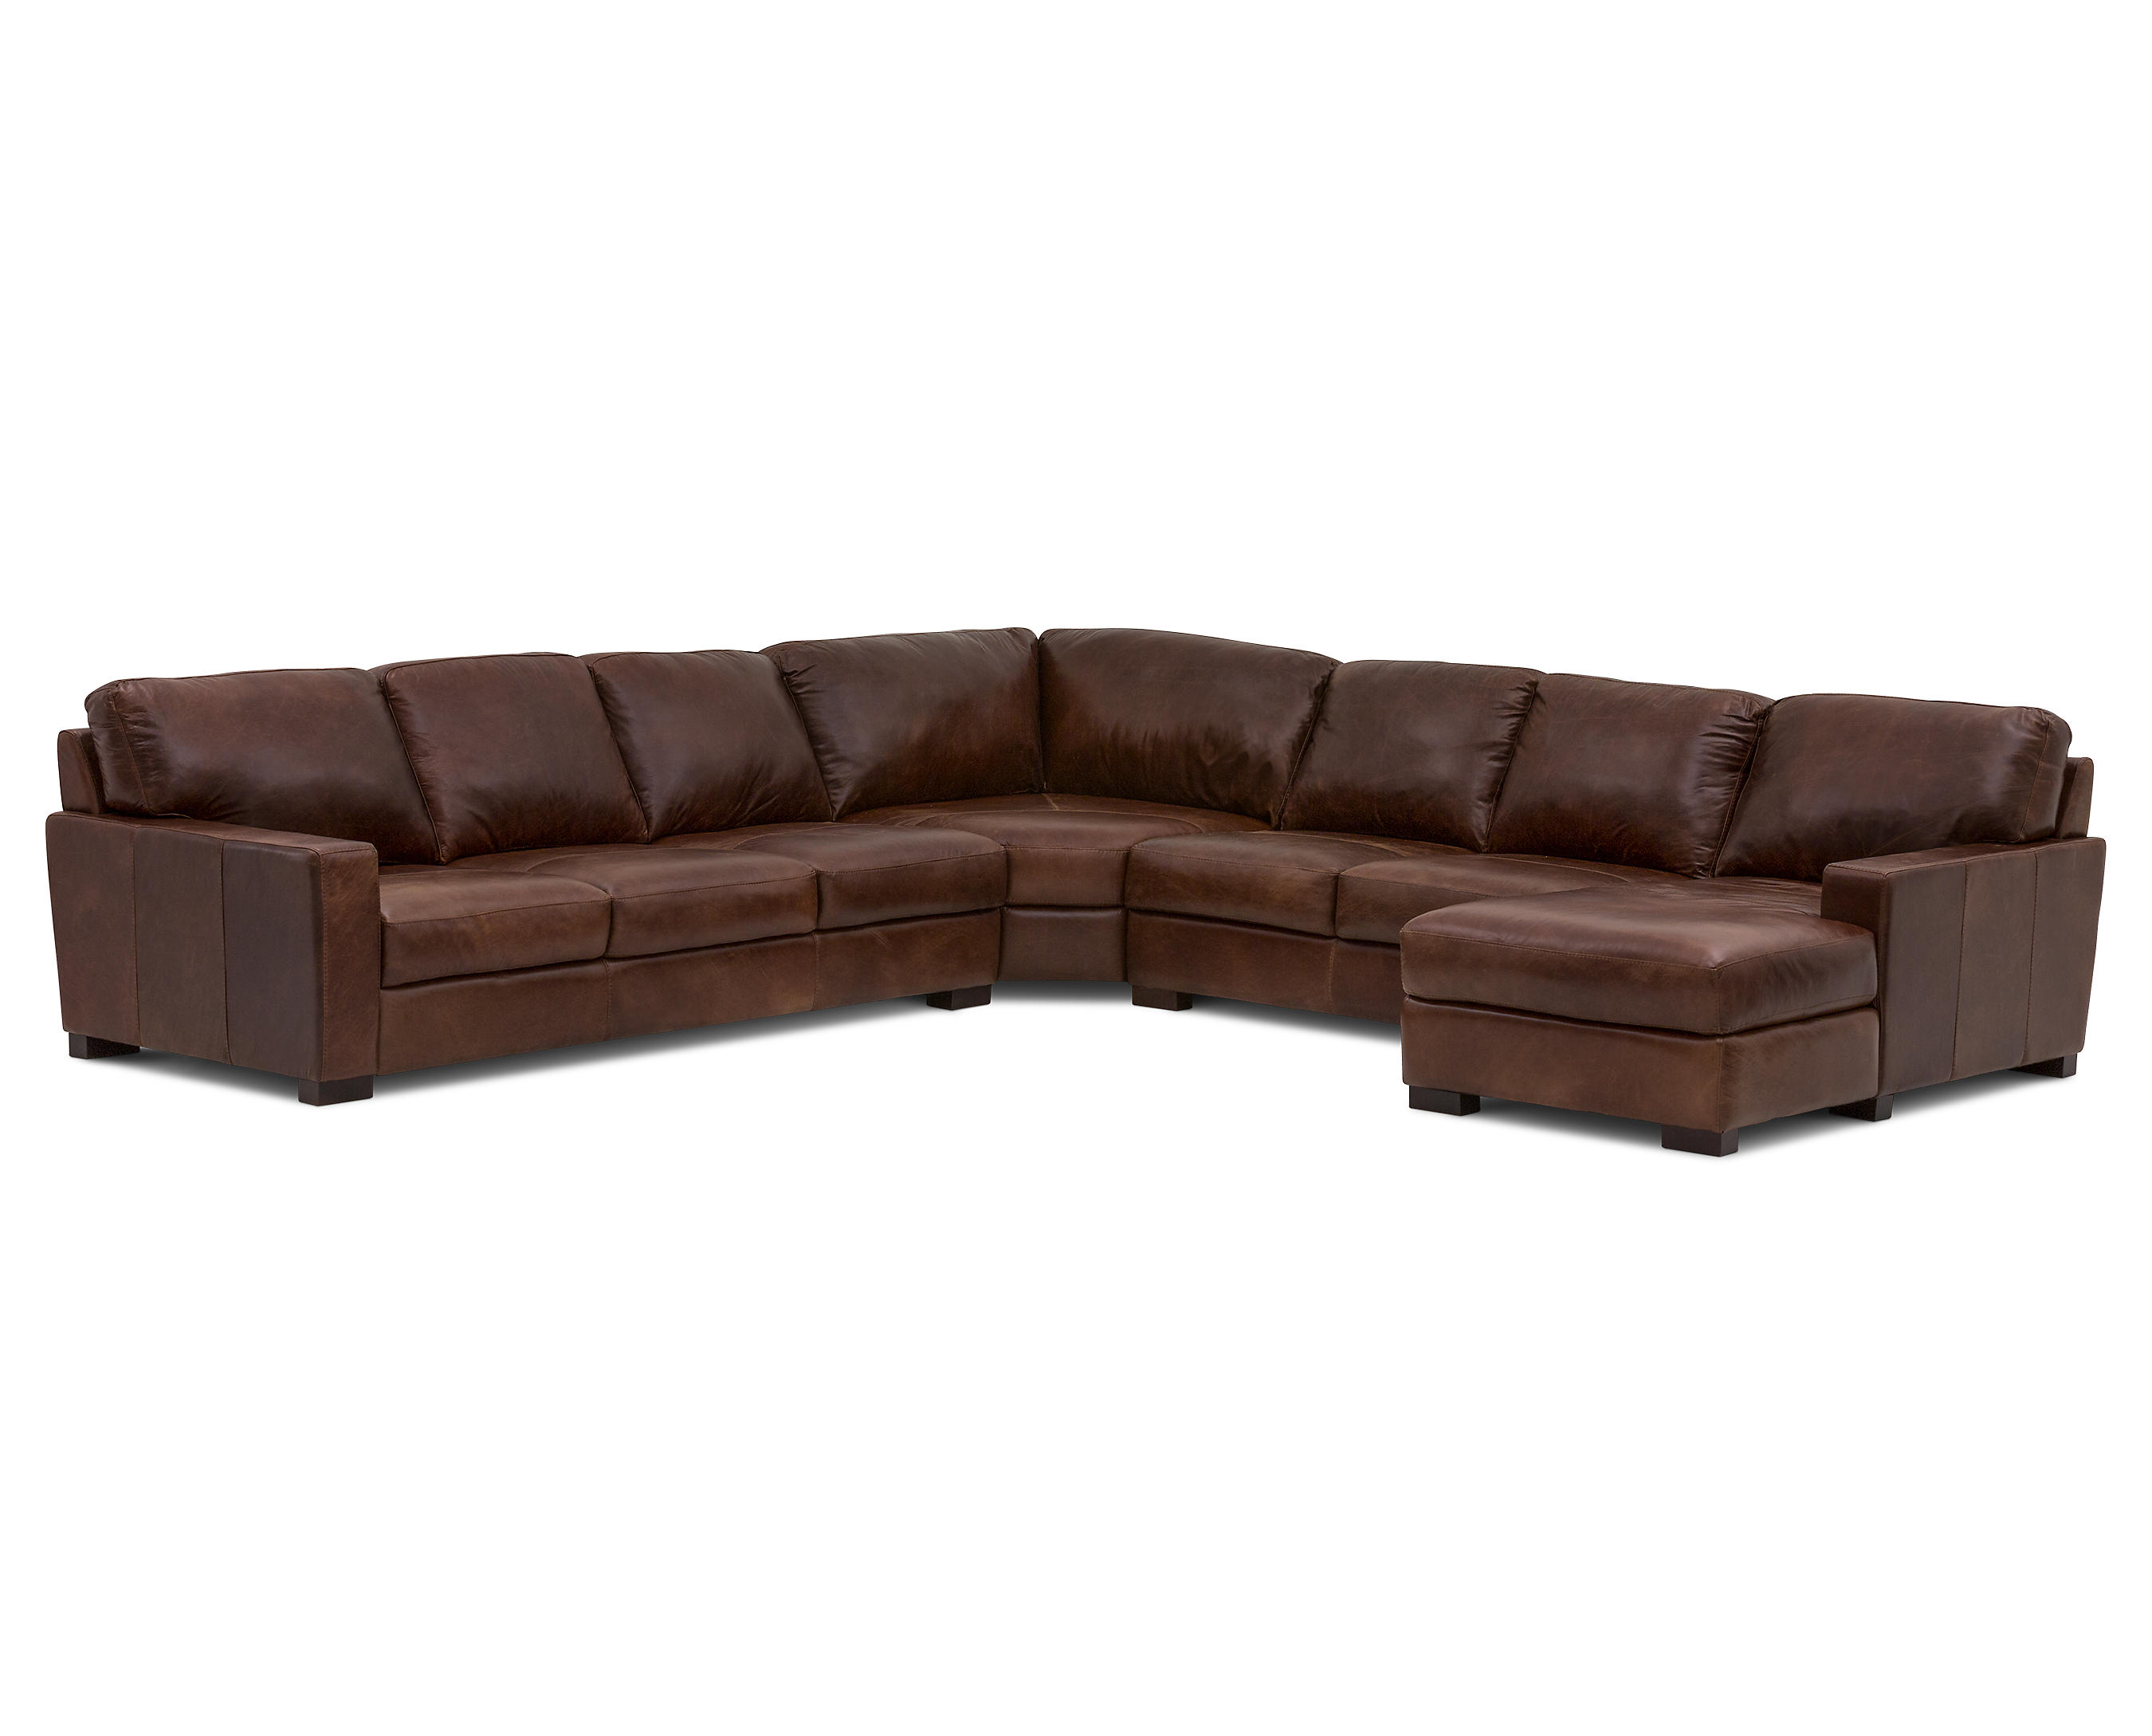 Durango 4 Pc Chaise Sectional, Leather Sofa Sectional With Chaise